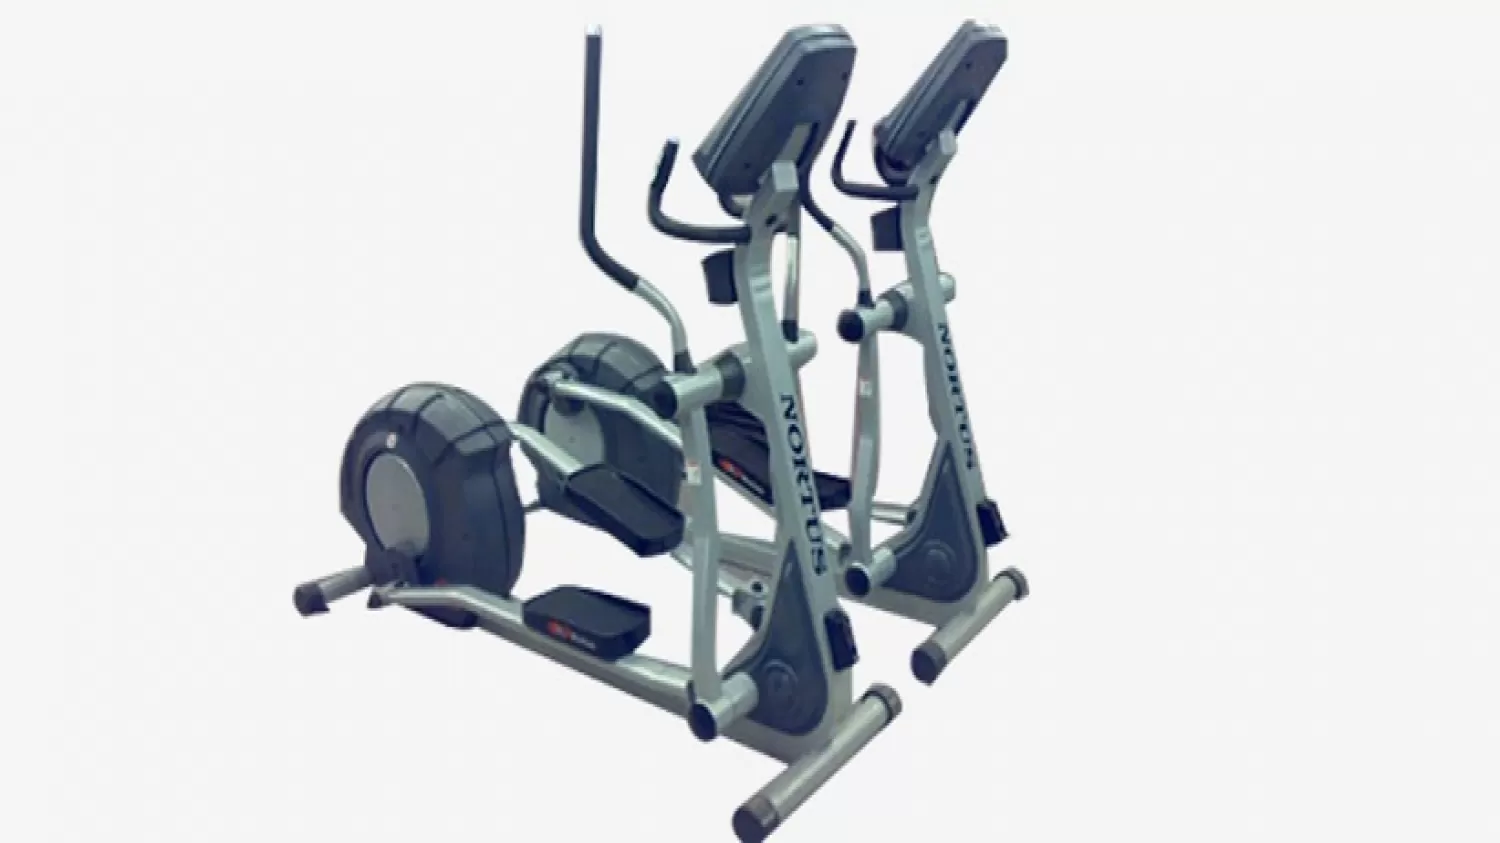 How to Operate the Commercial Elliptical Machine?